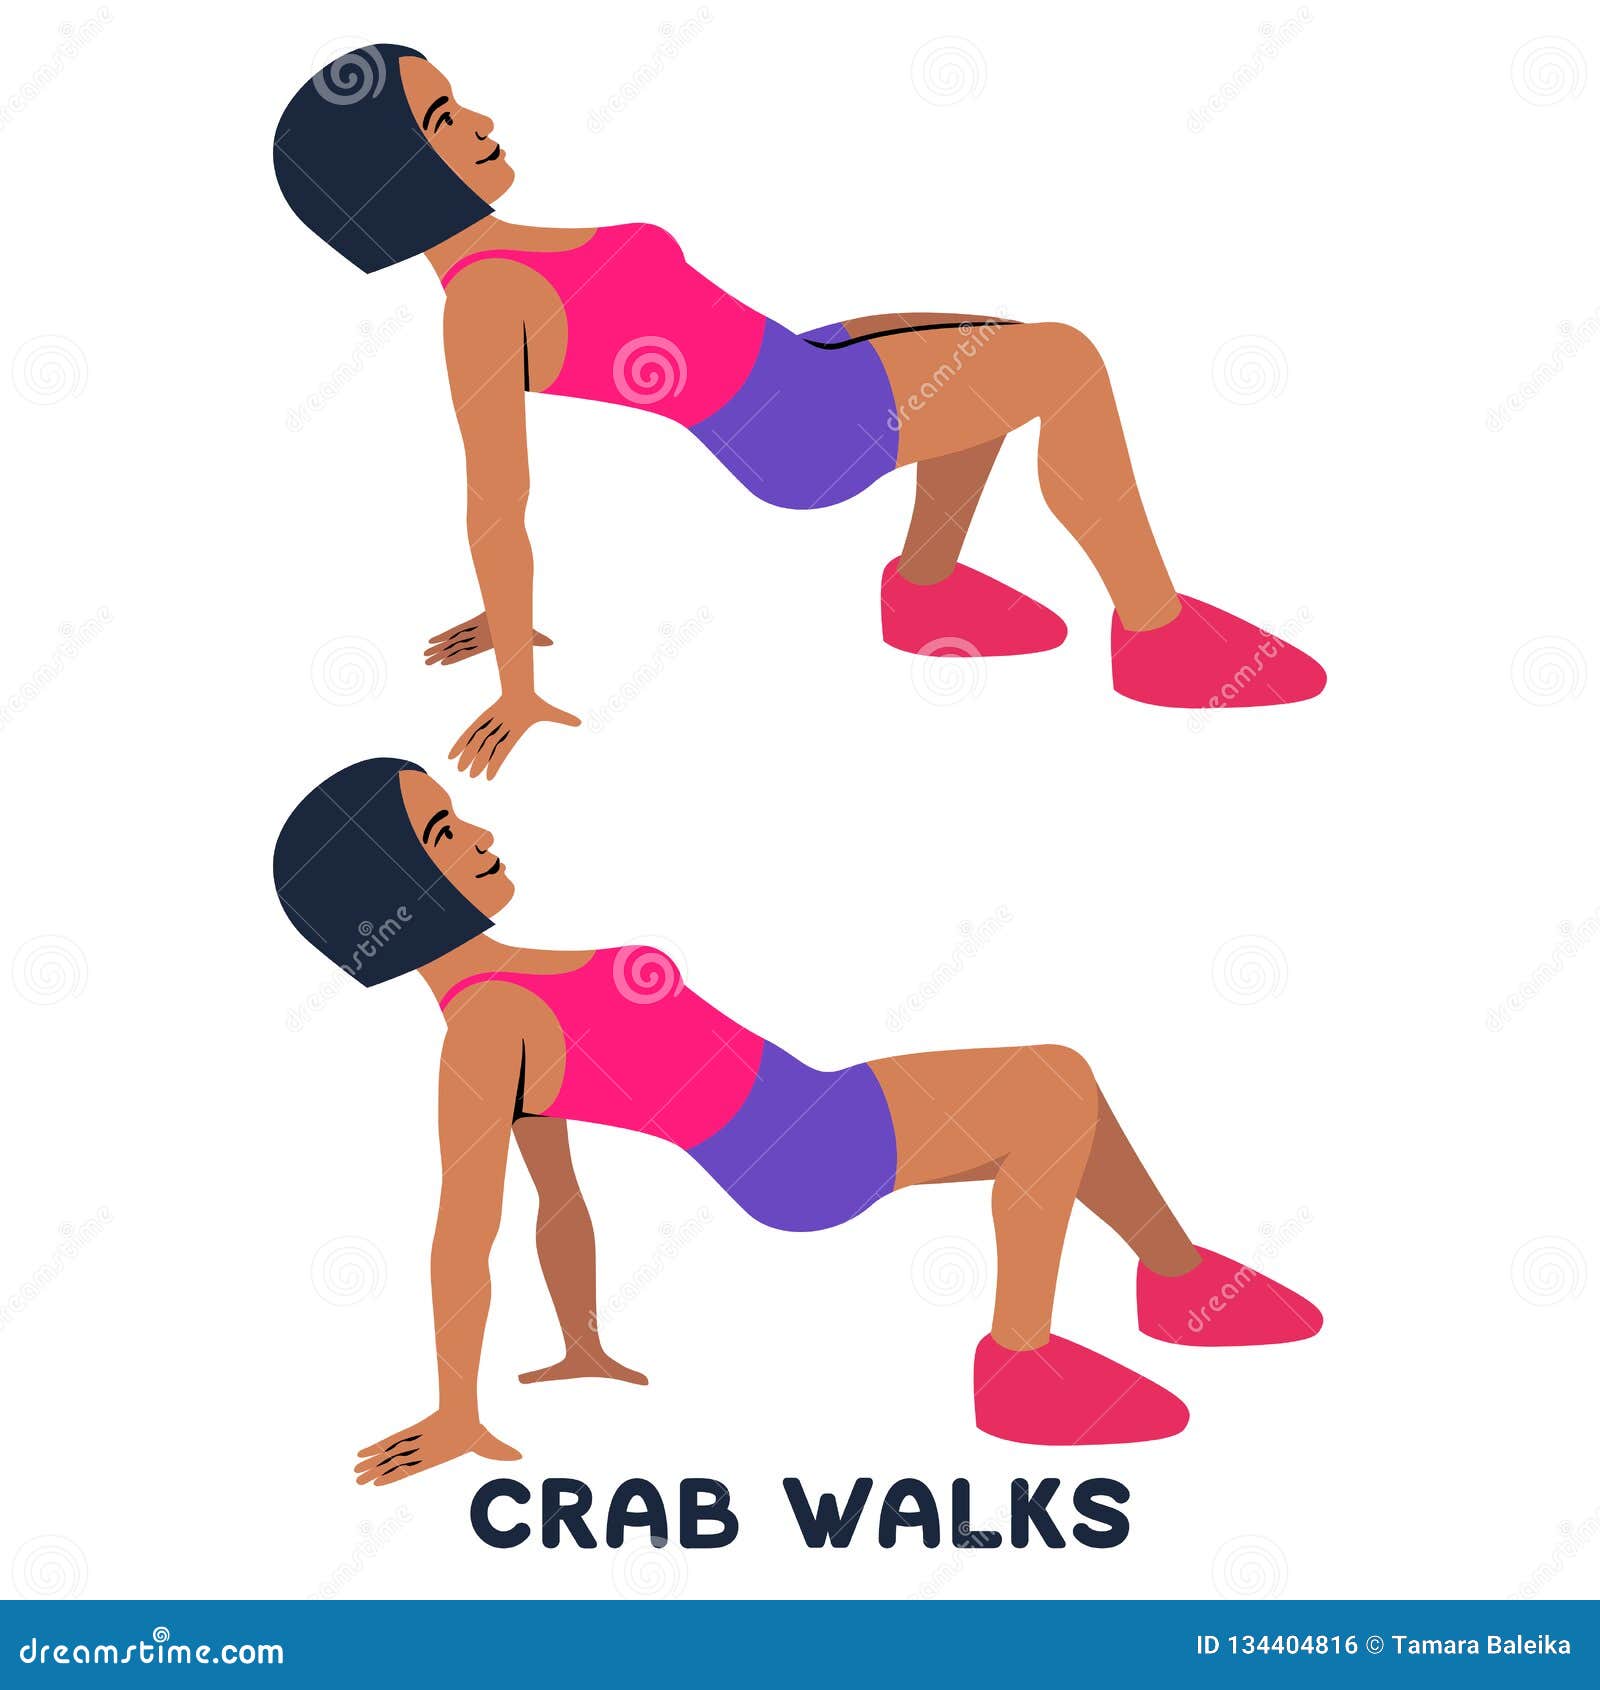 crab walks. squat. sport exersice. silhouettes of woman doing exercise. workout, training